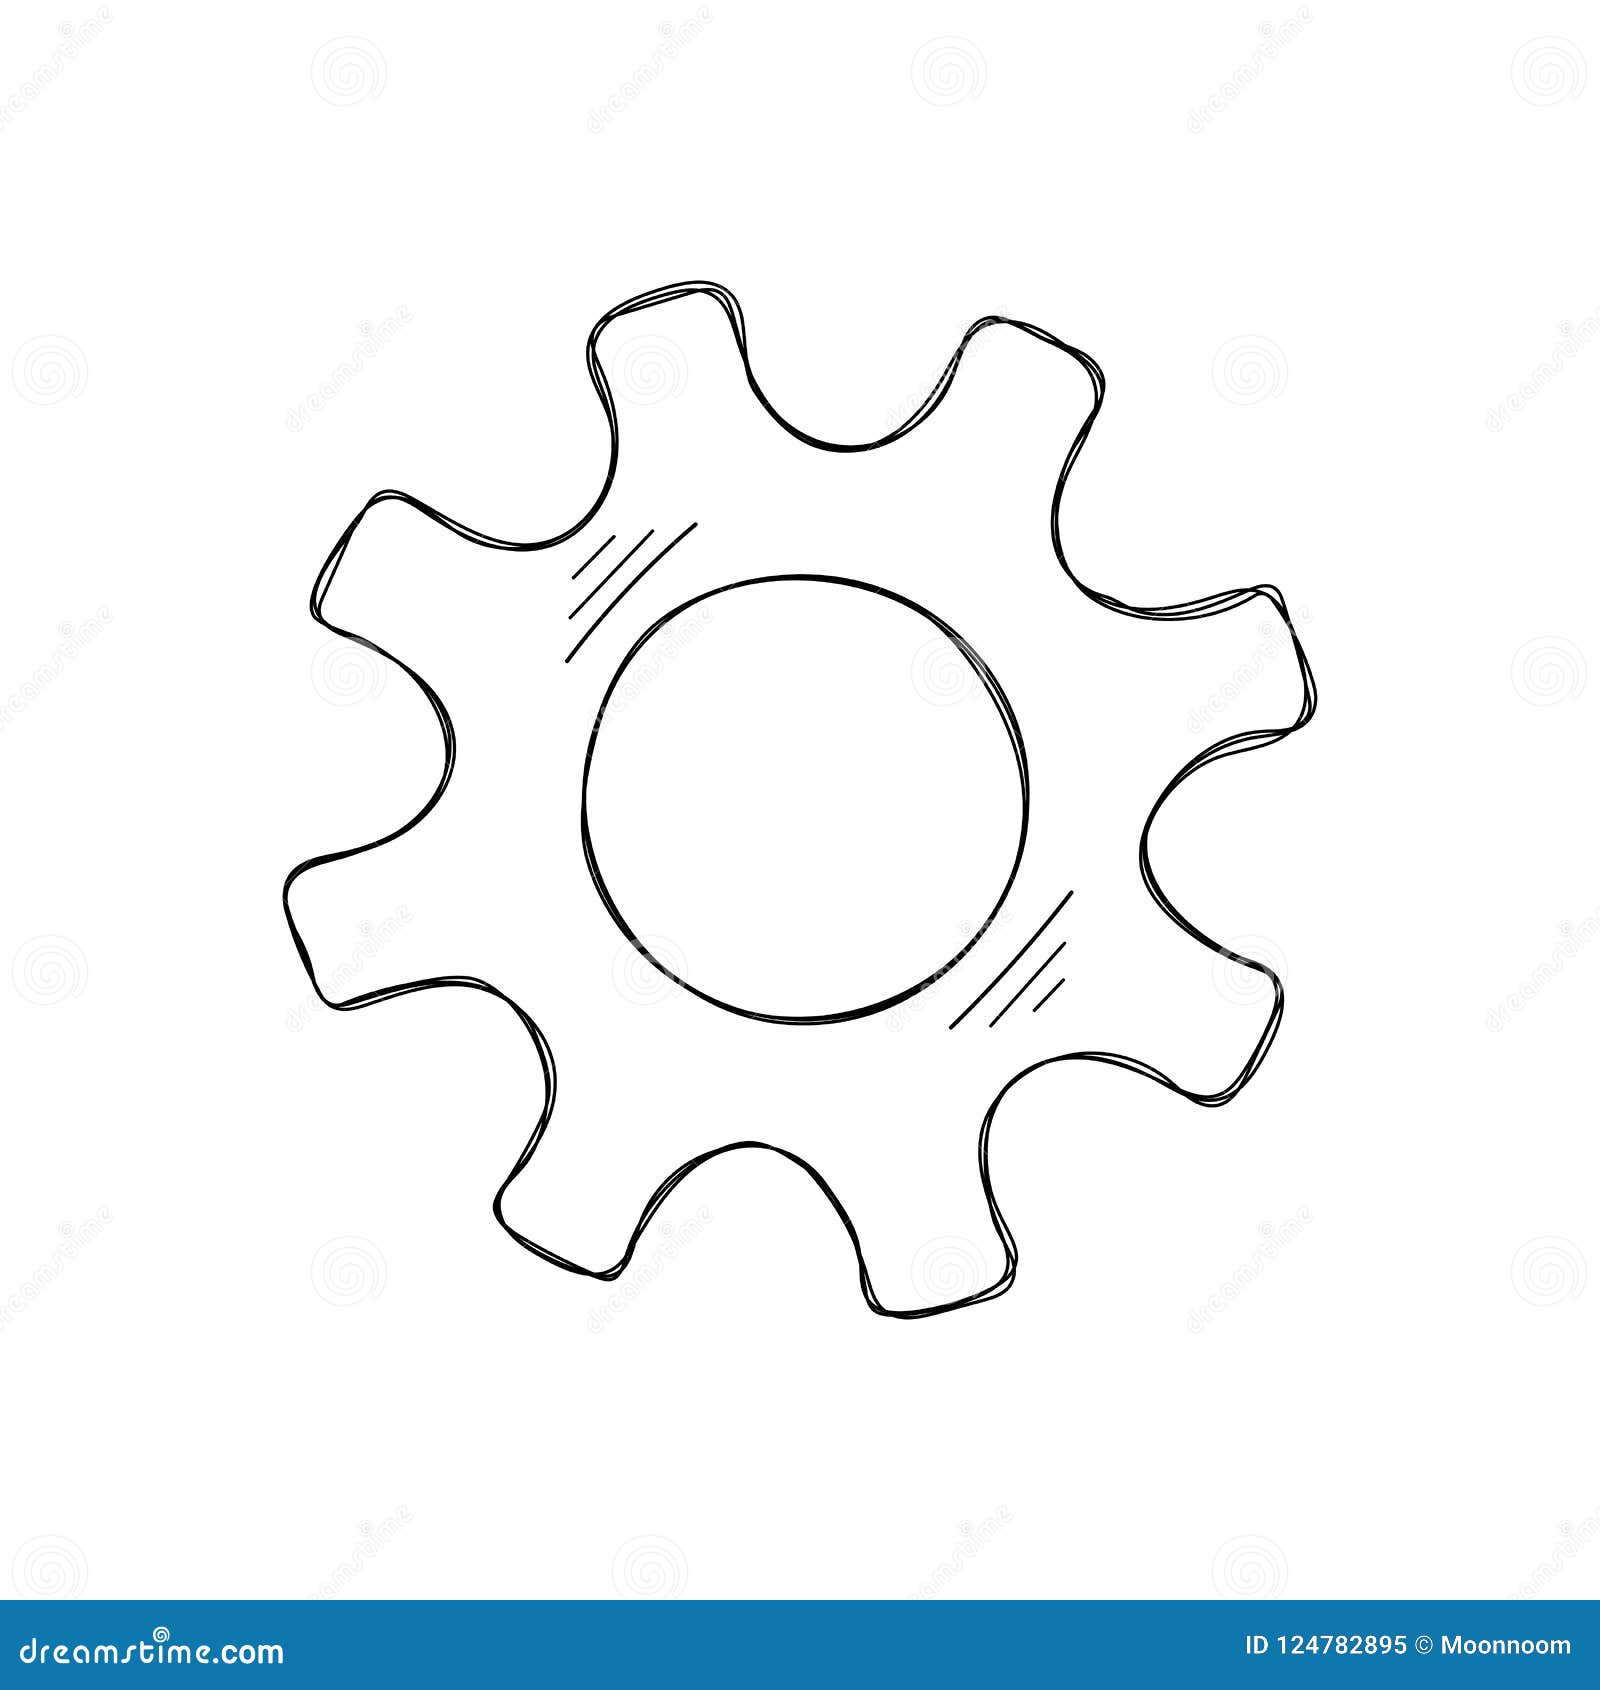 Development Concept Hand Drawn Cog and Gear Sketch Stock Vector